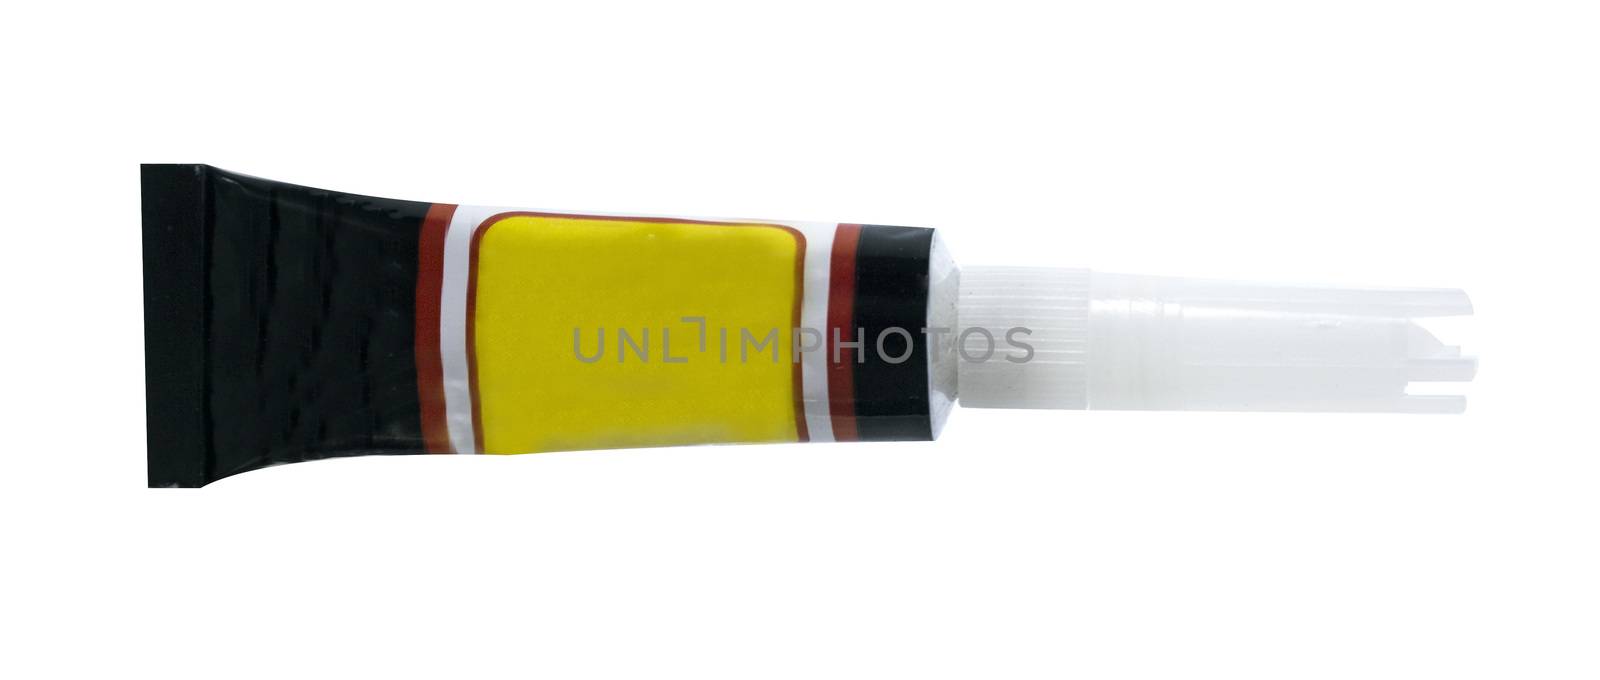 Metal tube of instant super glue isolated on white